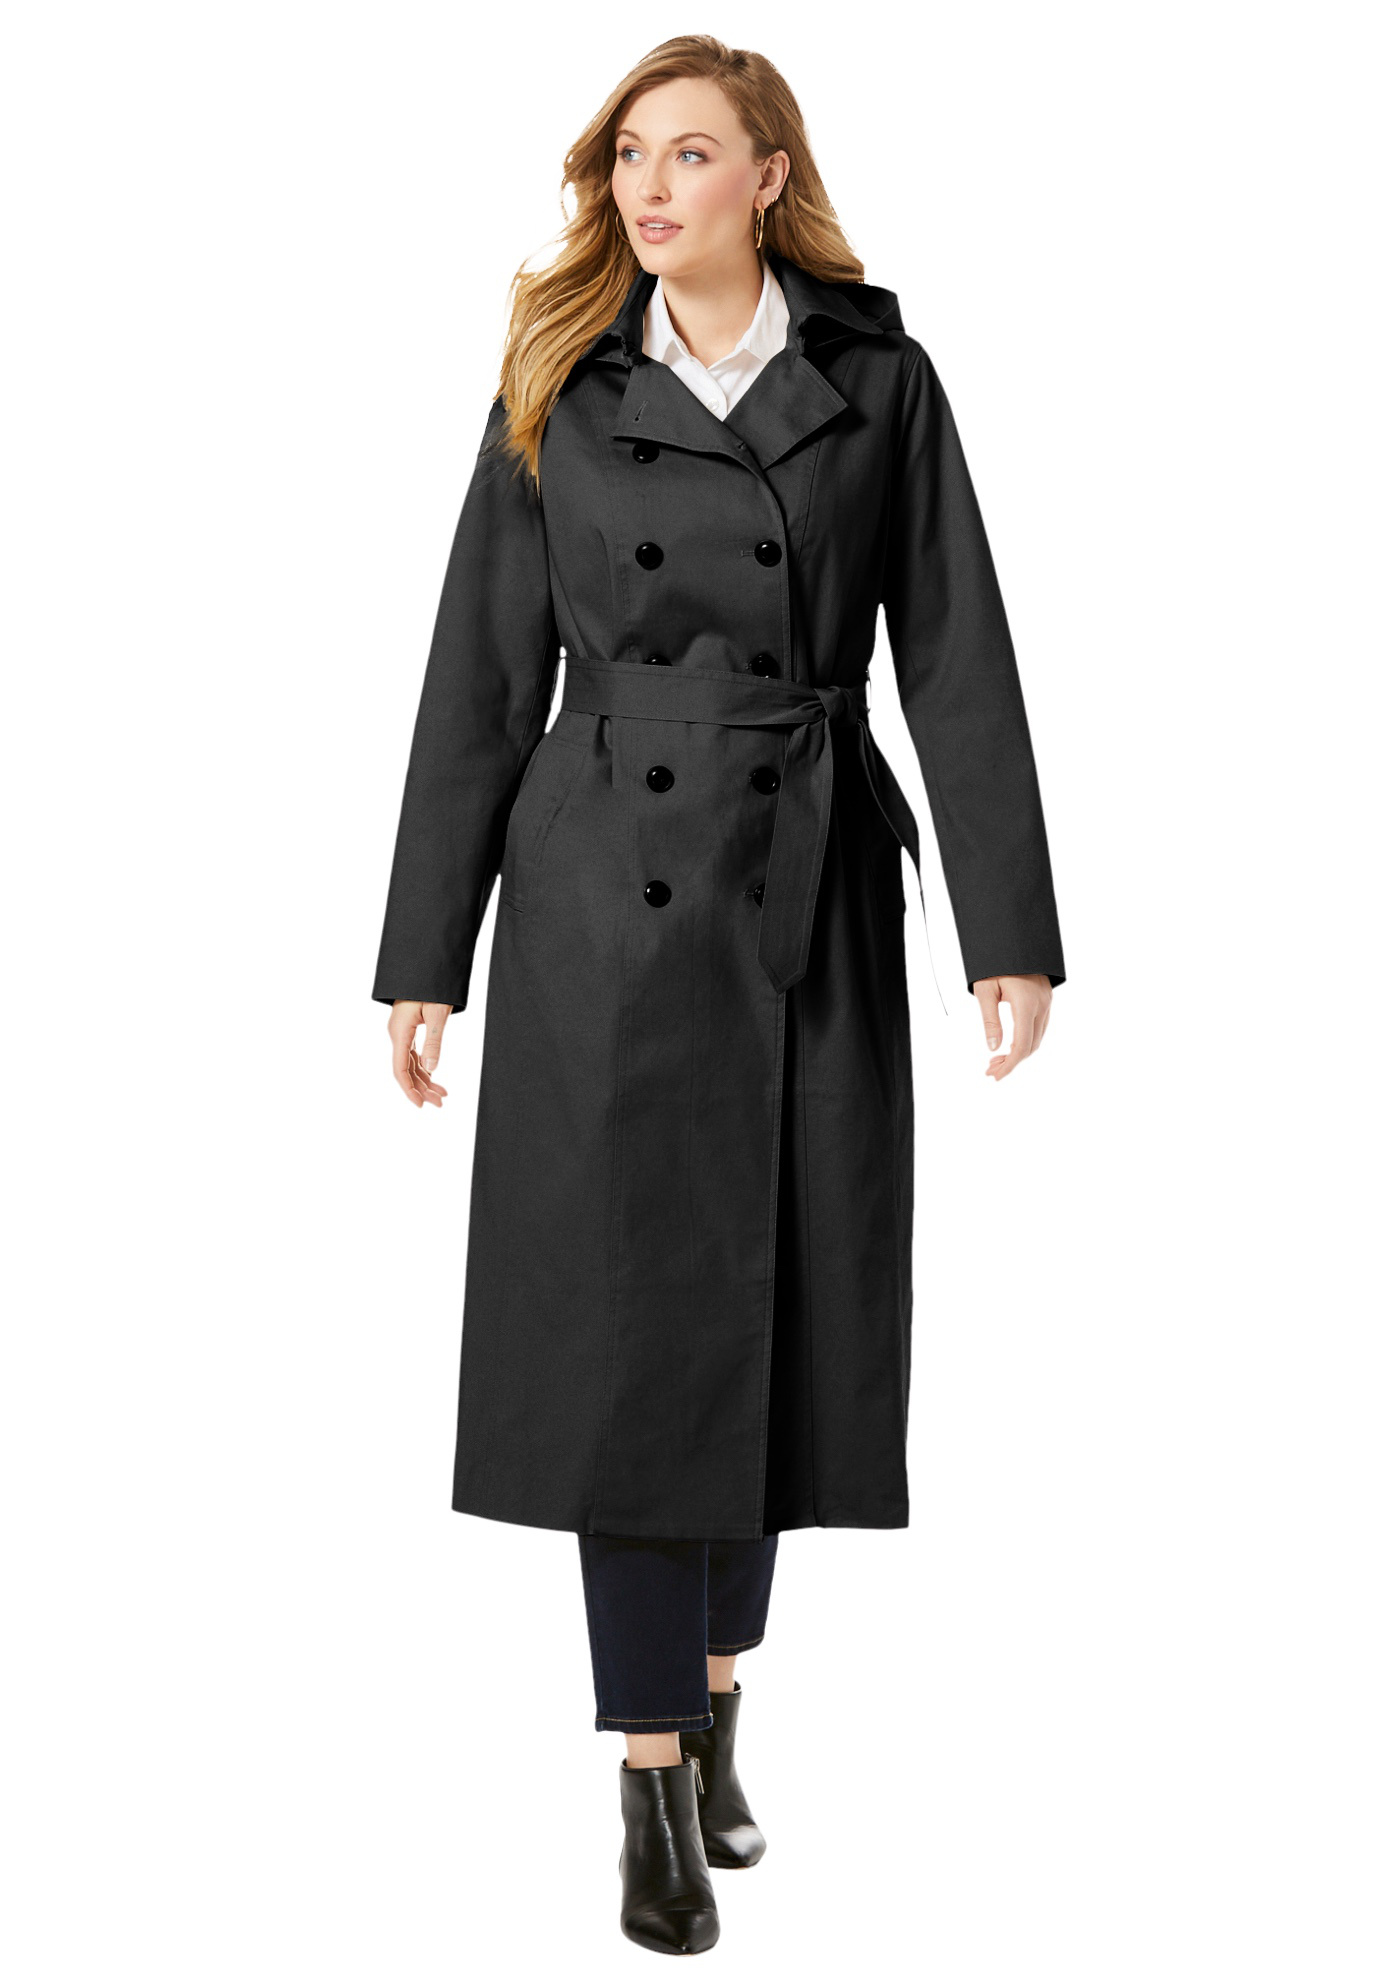 Jessica London Women's Plus Size Double Breasted Long Trench Raincoat Raincoat - image 1 of 6